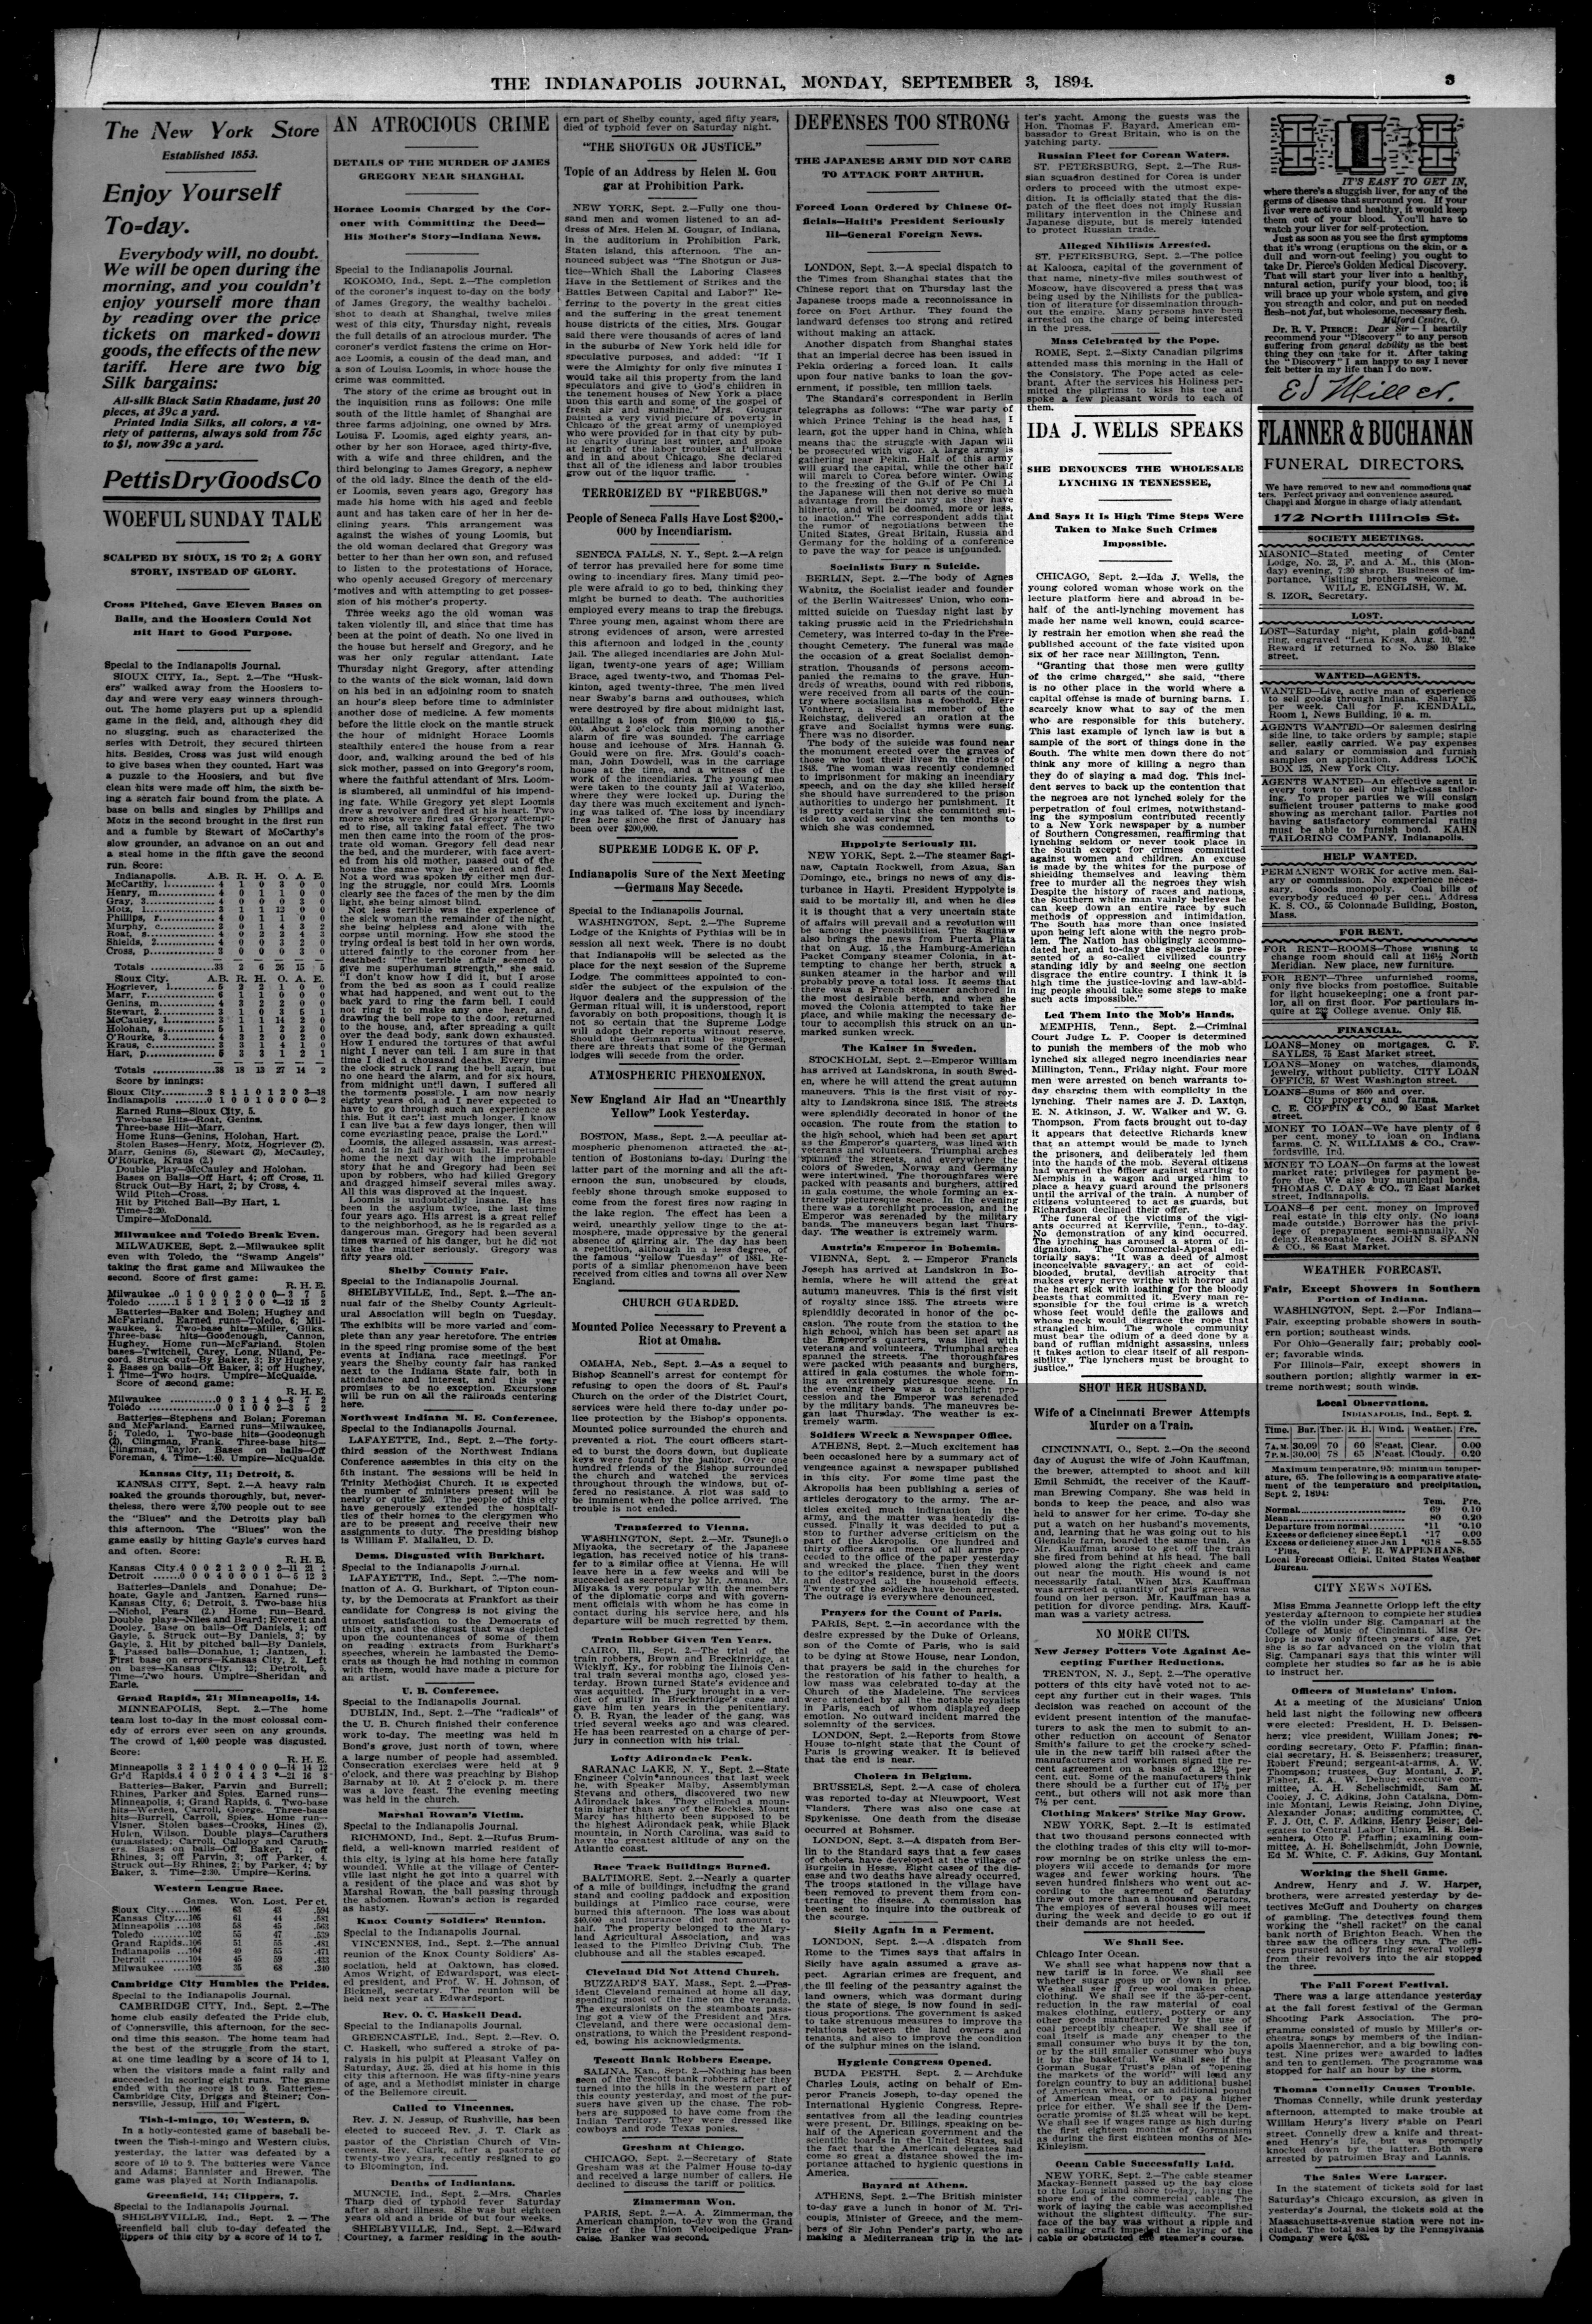 Indianapolis Journal, 9/3/1894